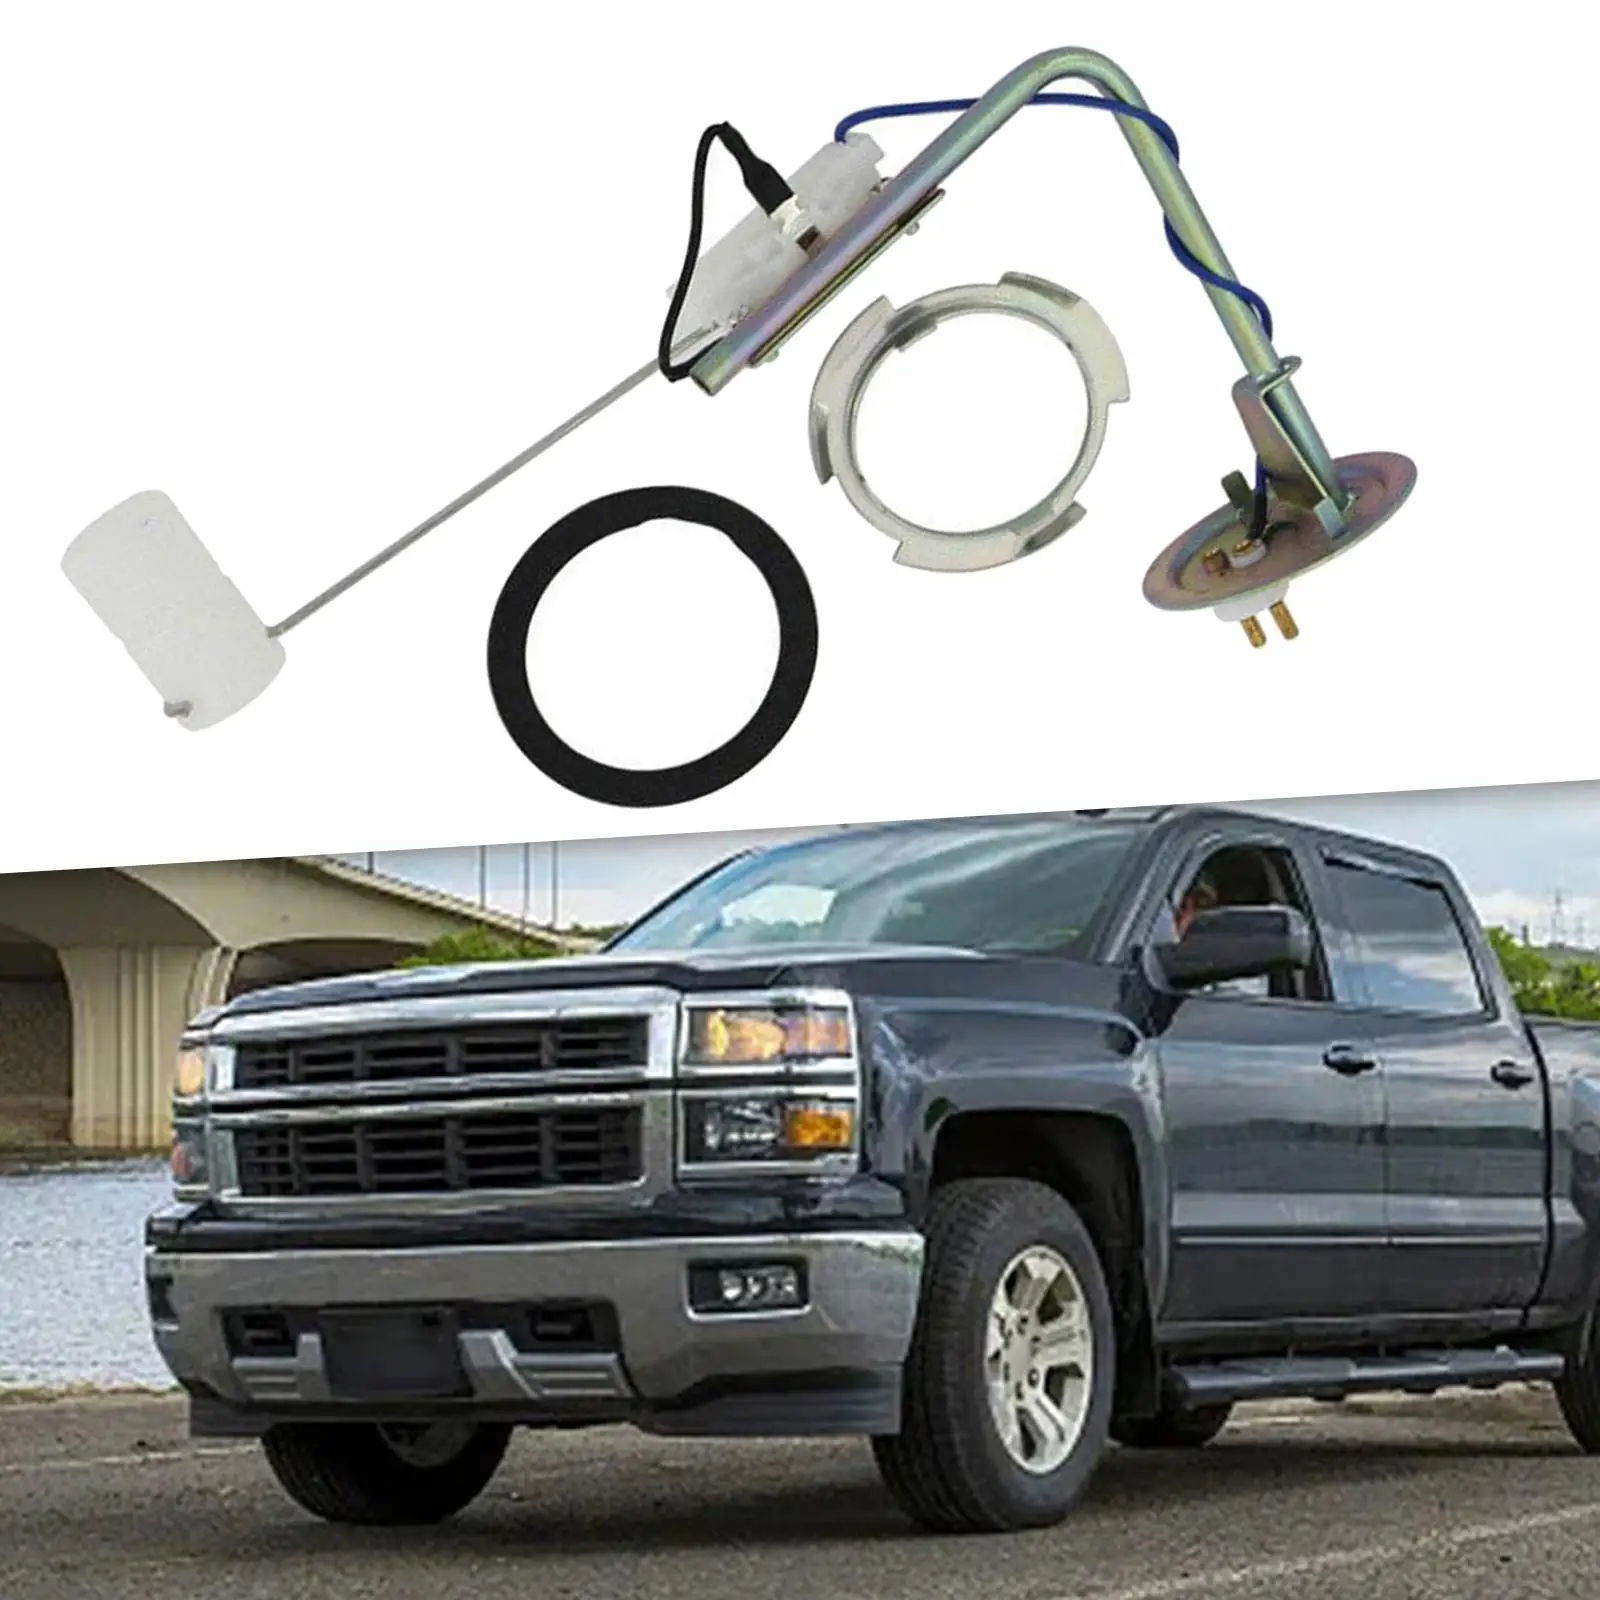 Fuel Pump Sender Replaces Durable 539GE for Lincoln Mercury 1980-1989